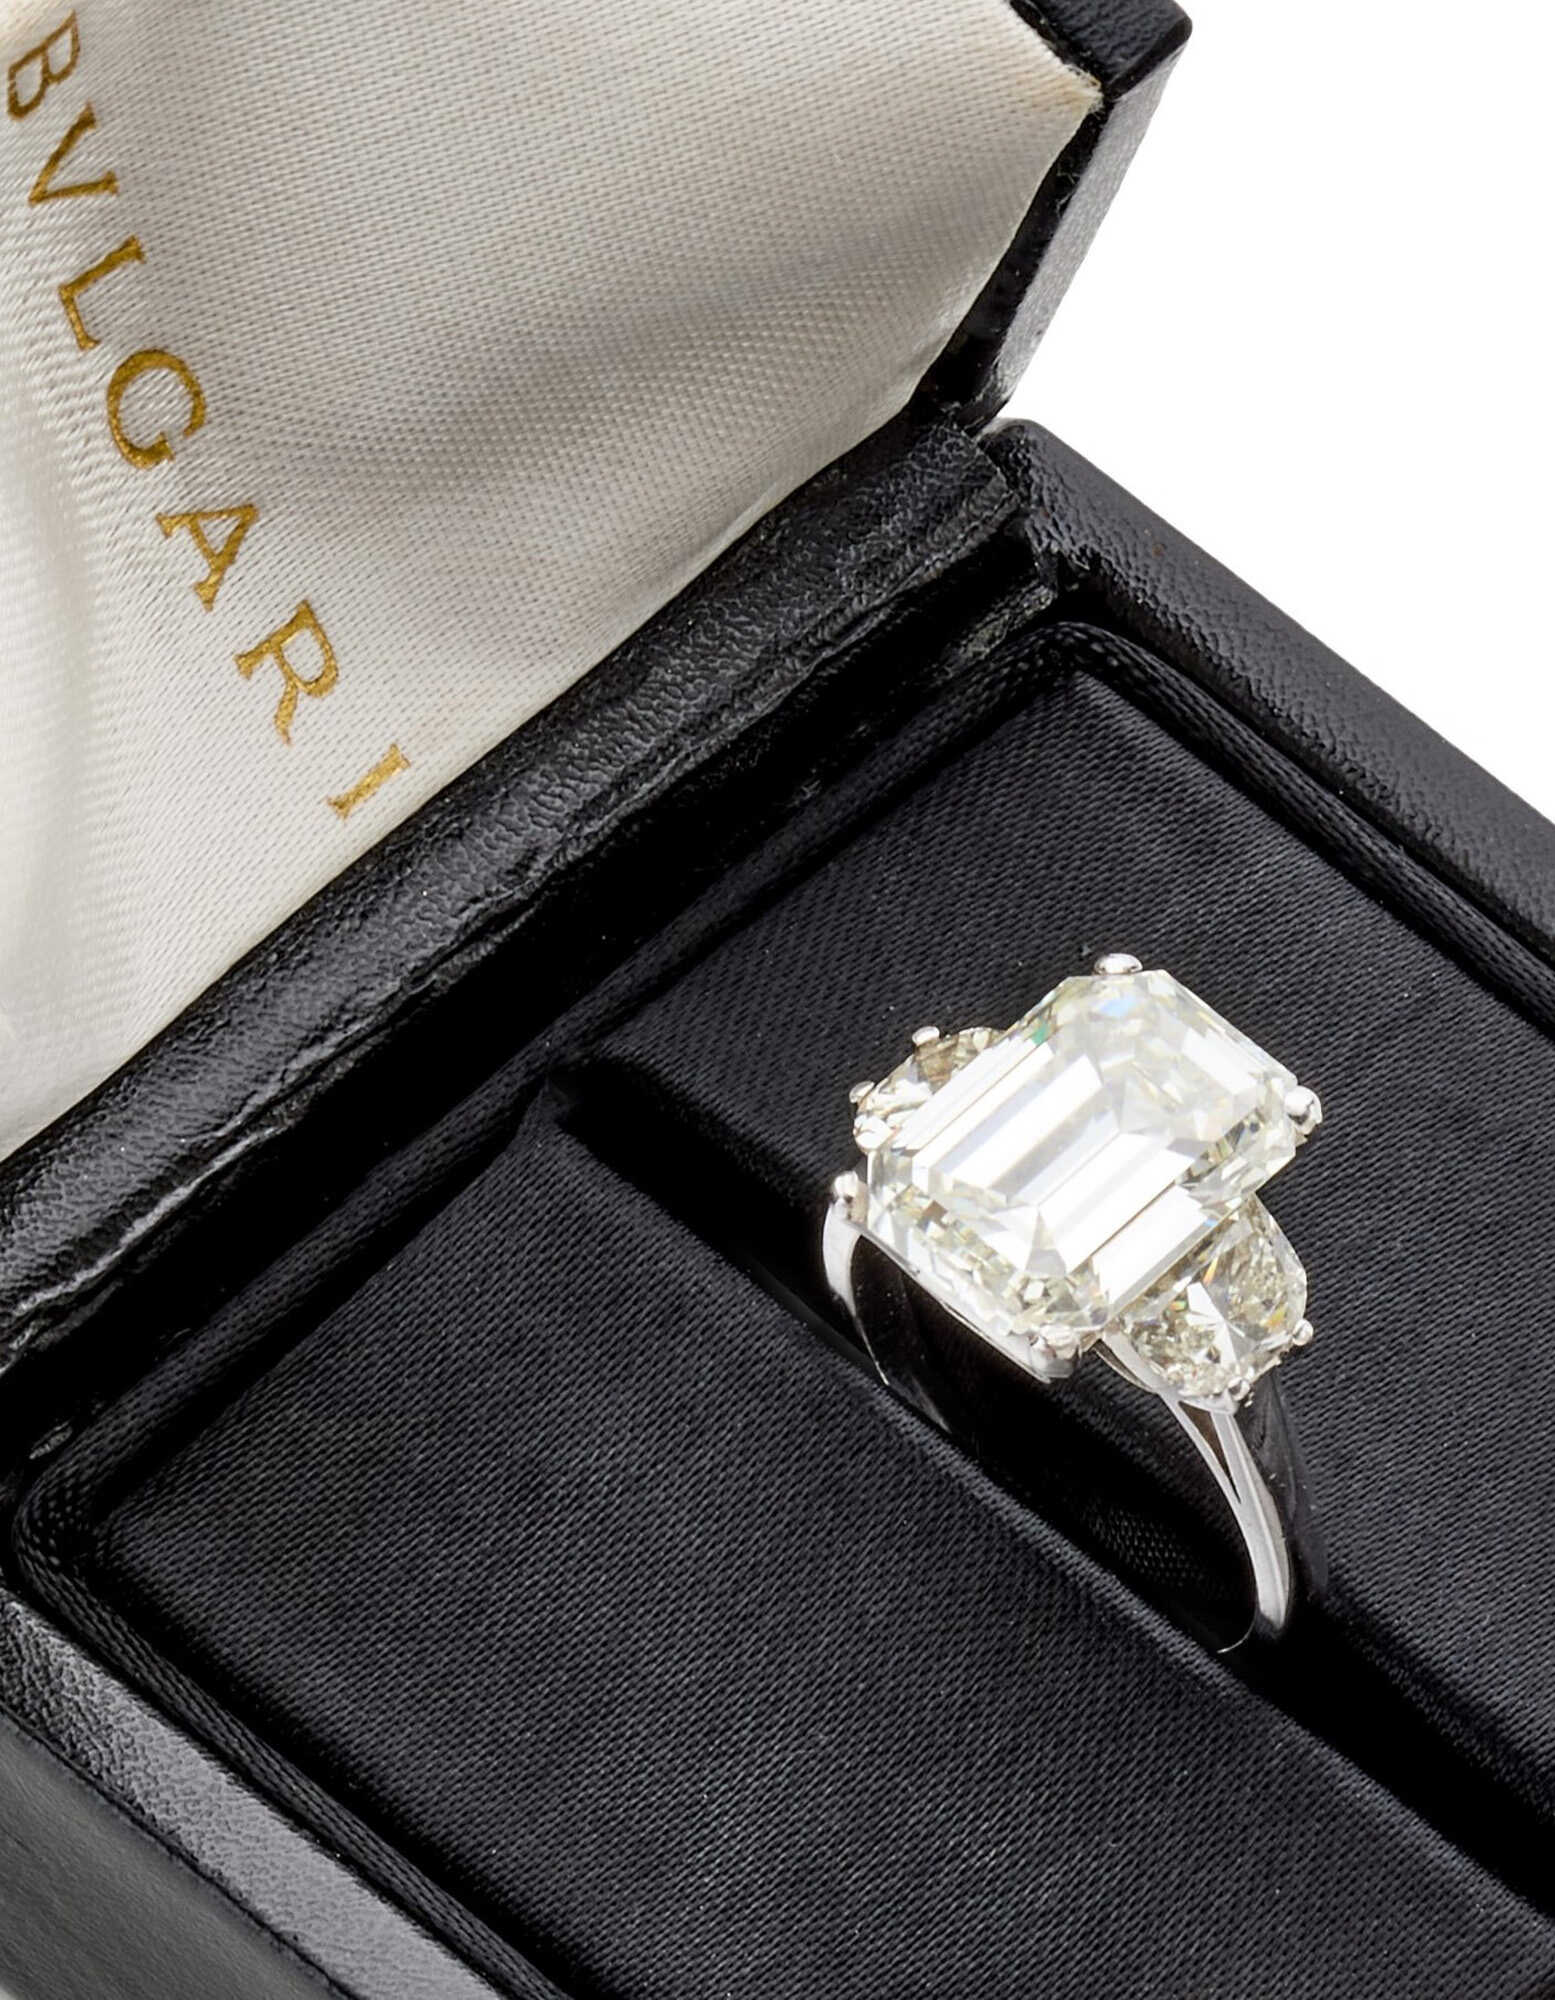 BULGARI | Octagonal ct. 7.90 diamond and platinum gold ring accented with two lateral crescent moon shaped diamonds, diamonds in all ct. 9.50 circa, g 8.87 circa. Signed and marked Bulgari, 1092 RM. In original case | | Appended diamond report GIA n